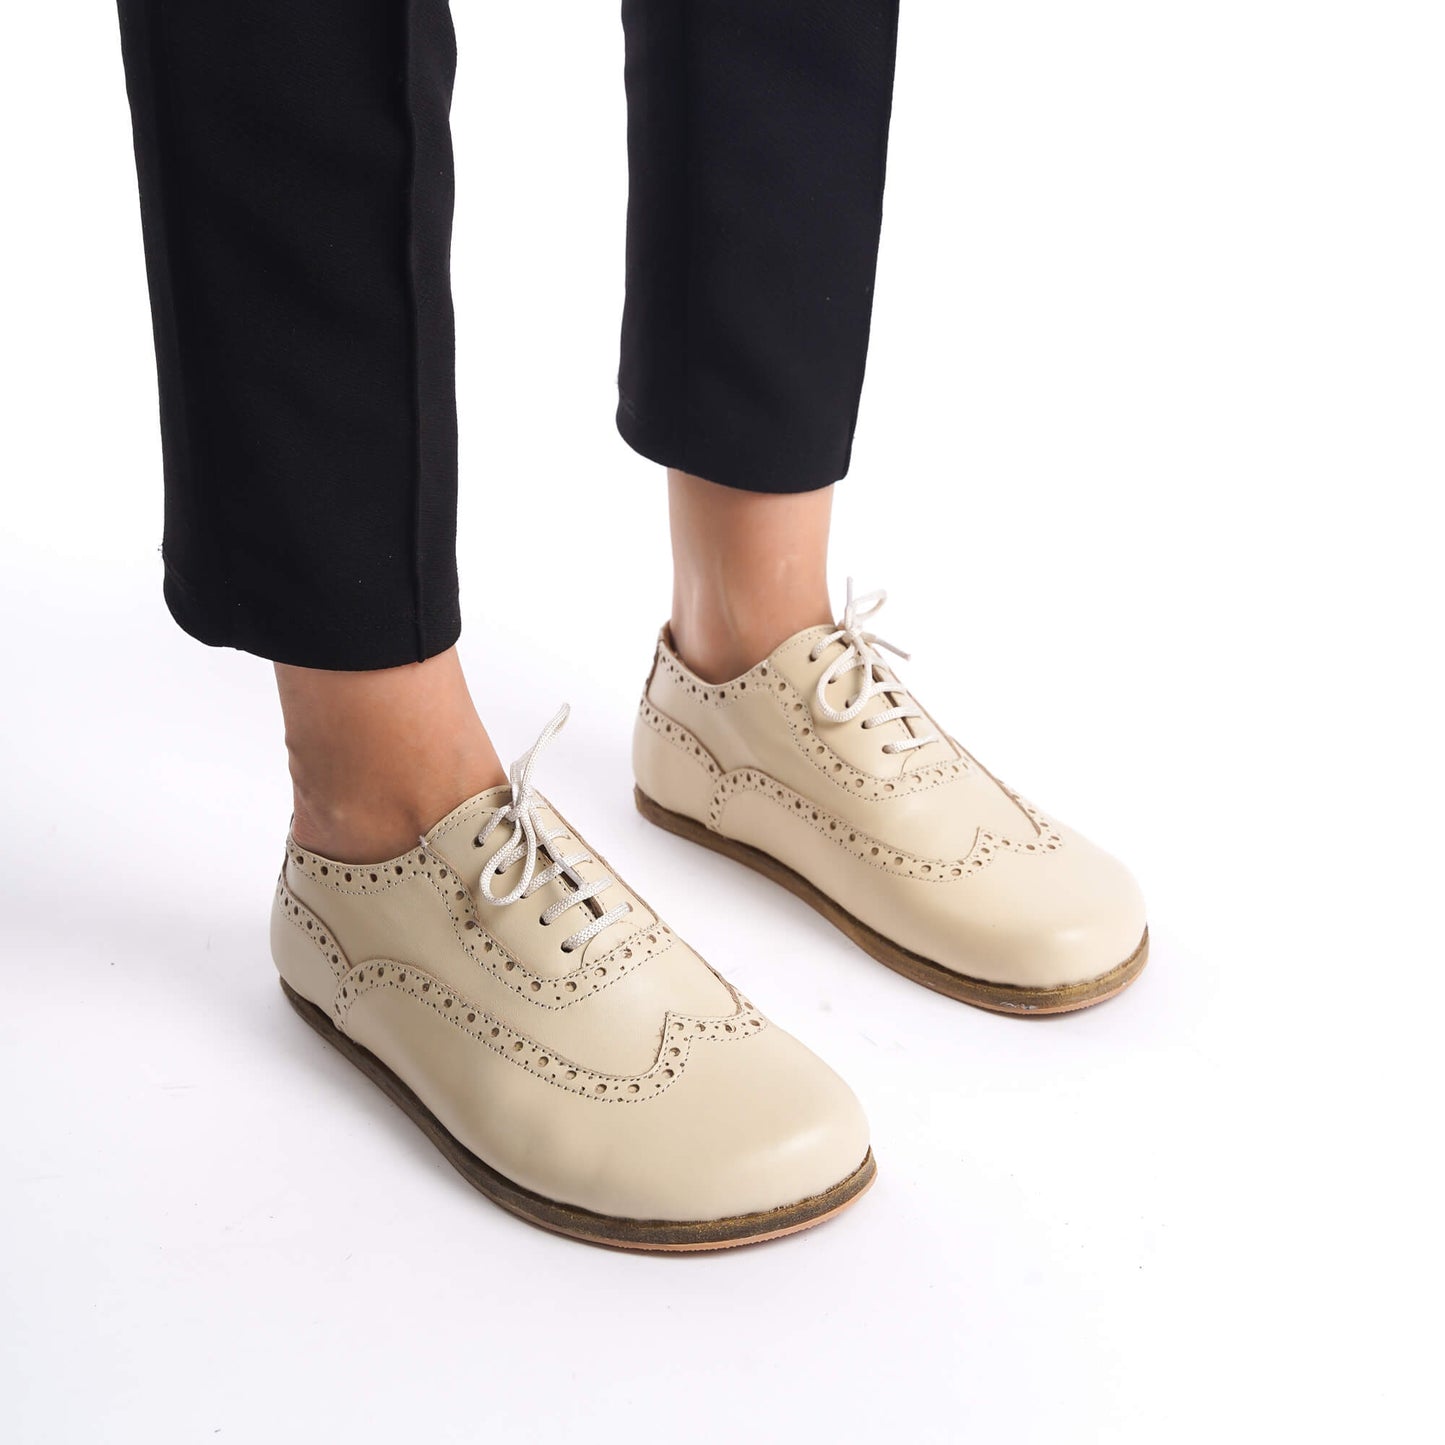 Woman's feet in beige Doris leather barefoot women's oxfords, highlighting their flexible sole and comfortable fit.